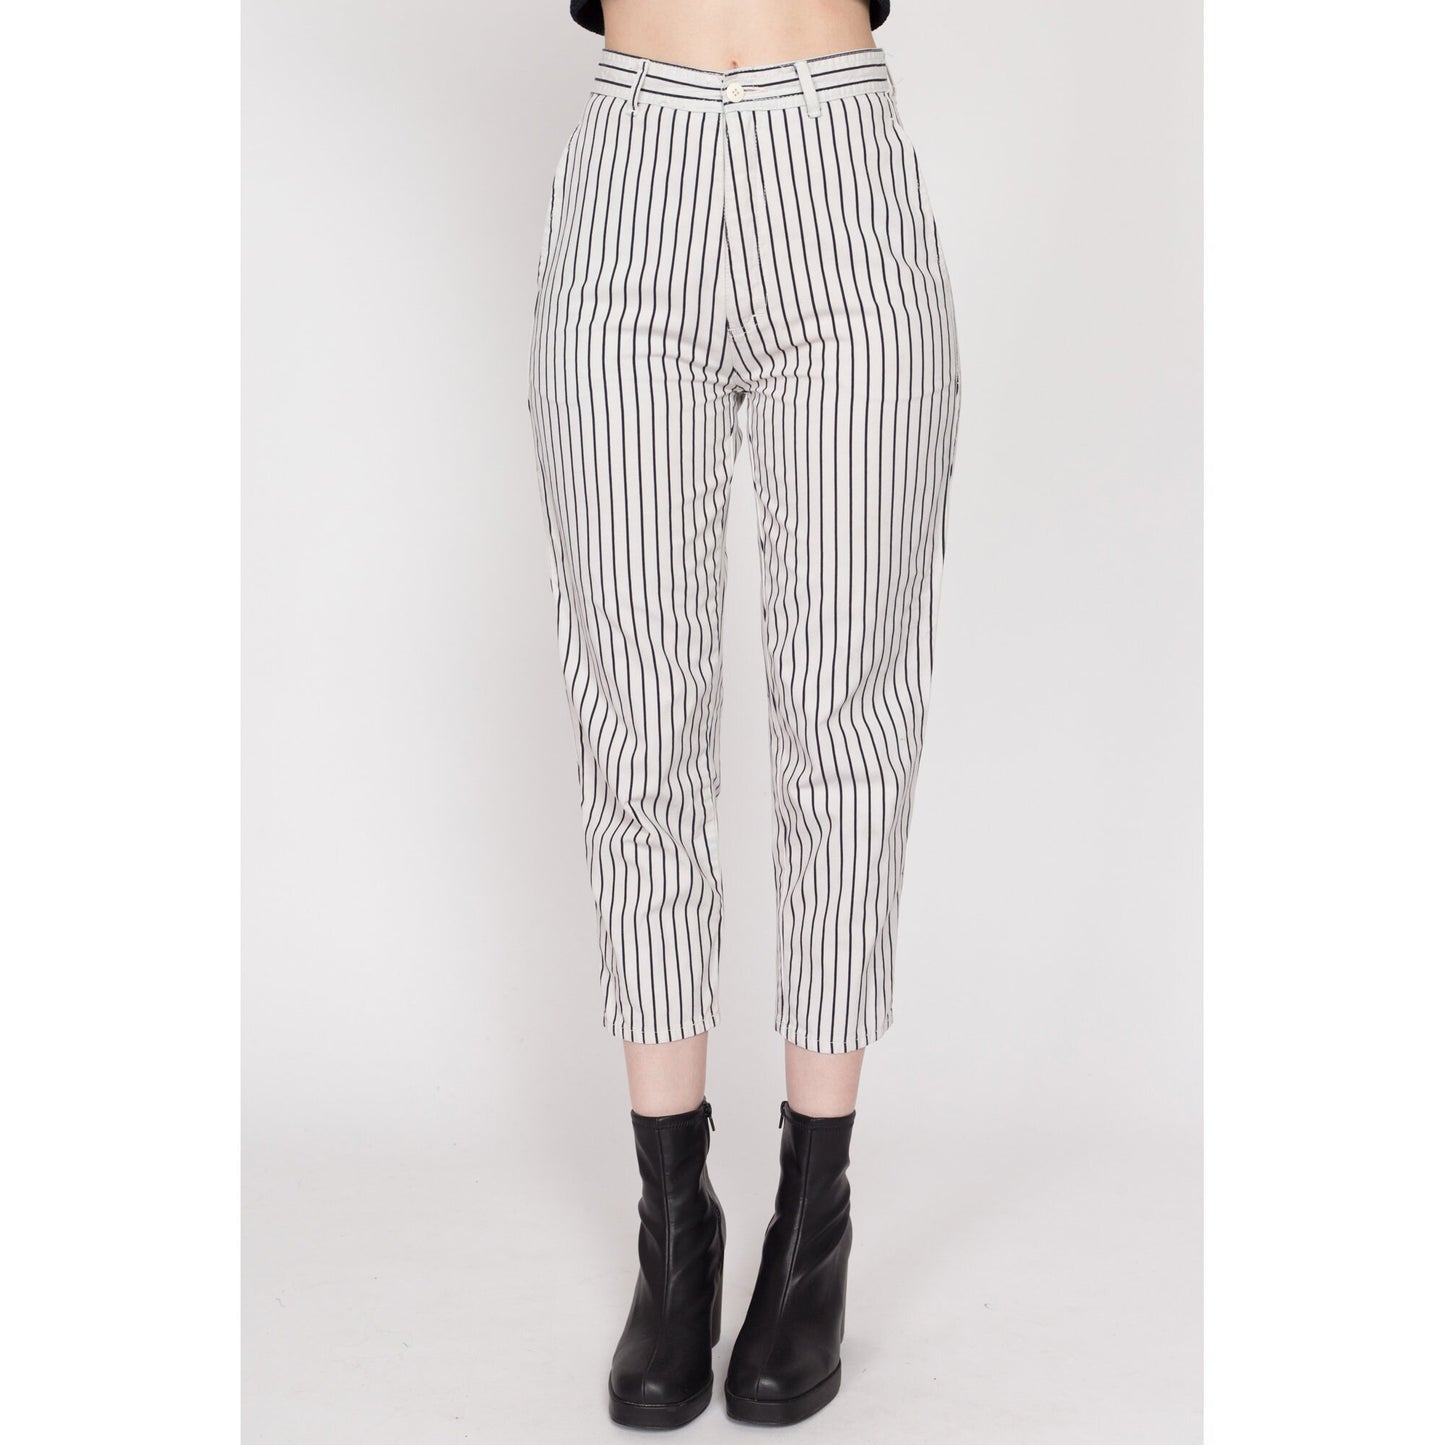 XS 80s Esprit Sport Black & White Striped Ankle Pants 25" | Vintage High Waisted Tapered Leg Cotton Trousers